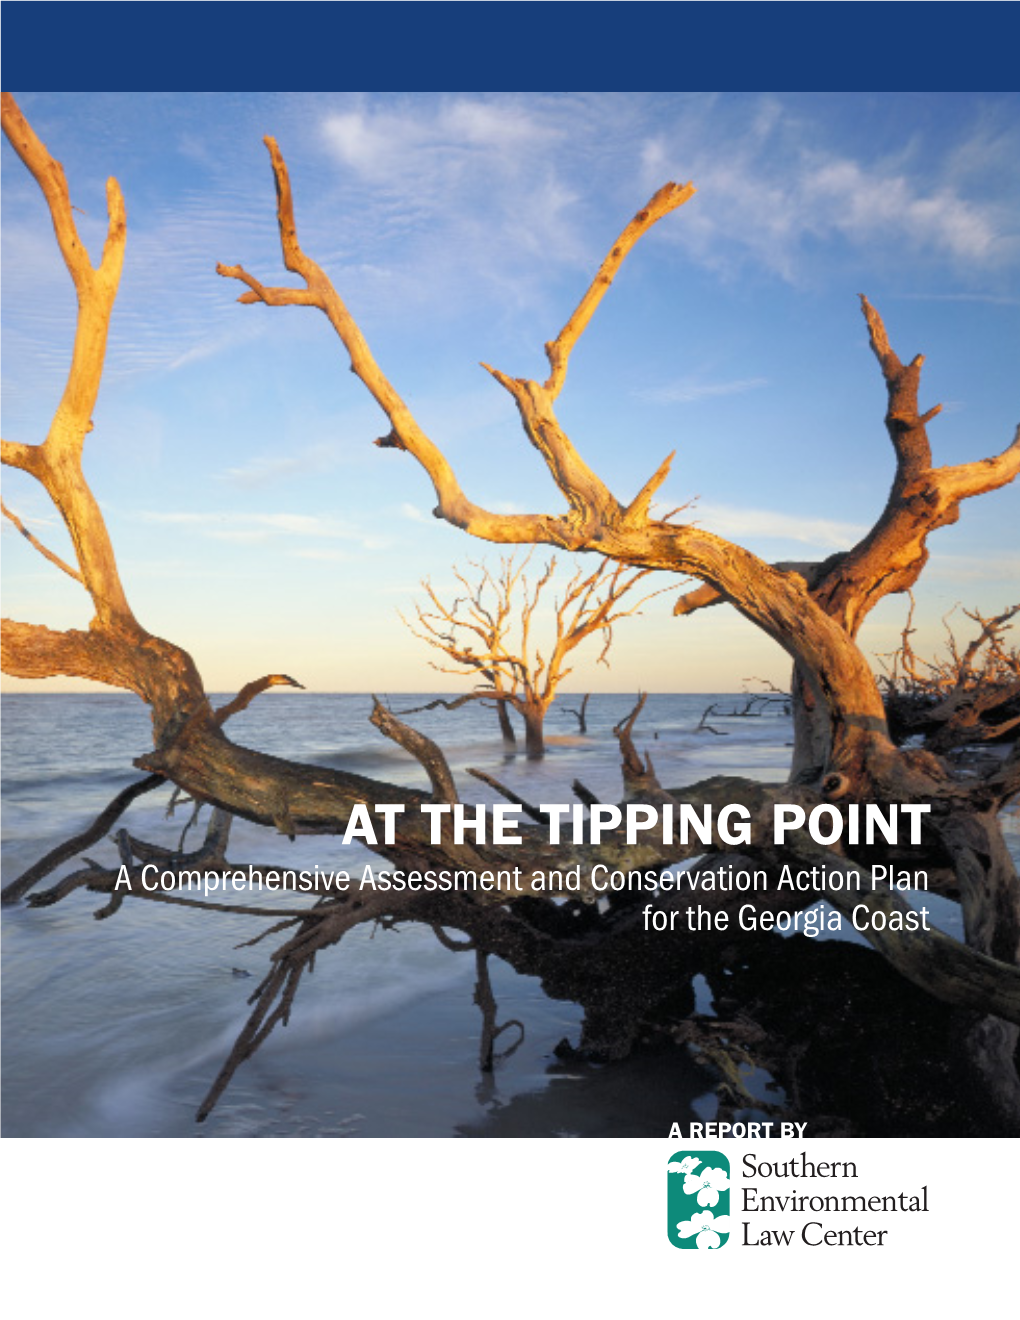 AT the TIPPING POINT a Comprehensive Assessment and Conservation Action Plan for the Georgia Coast